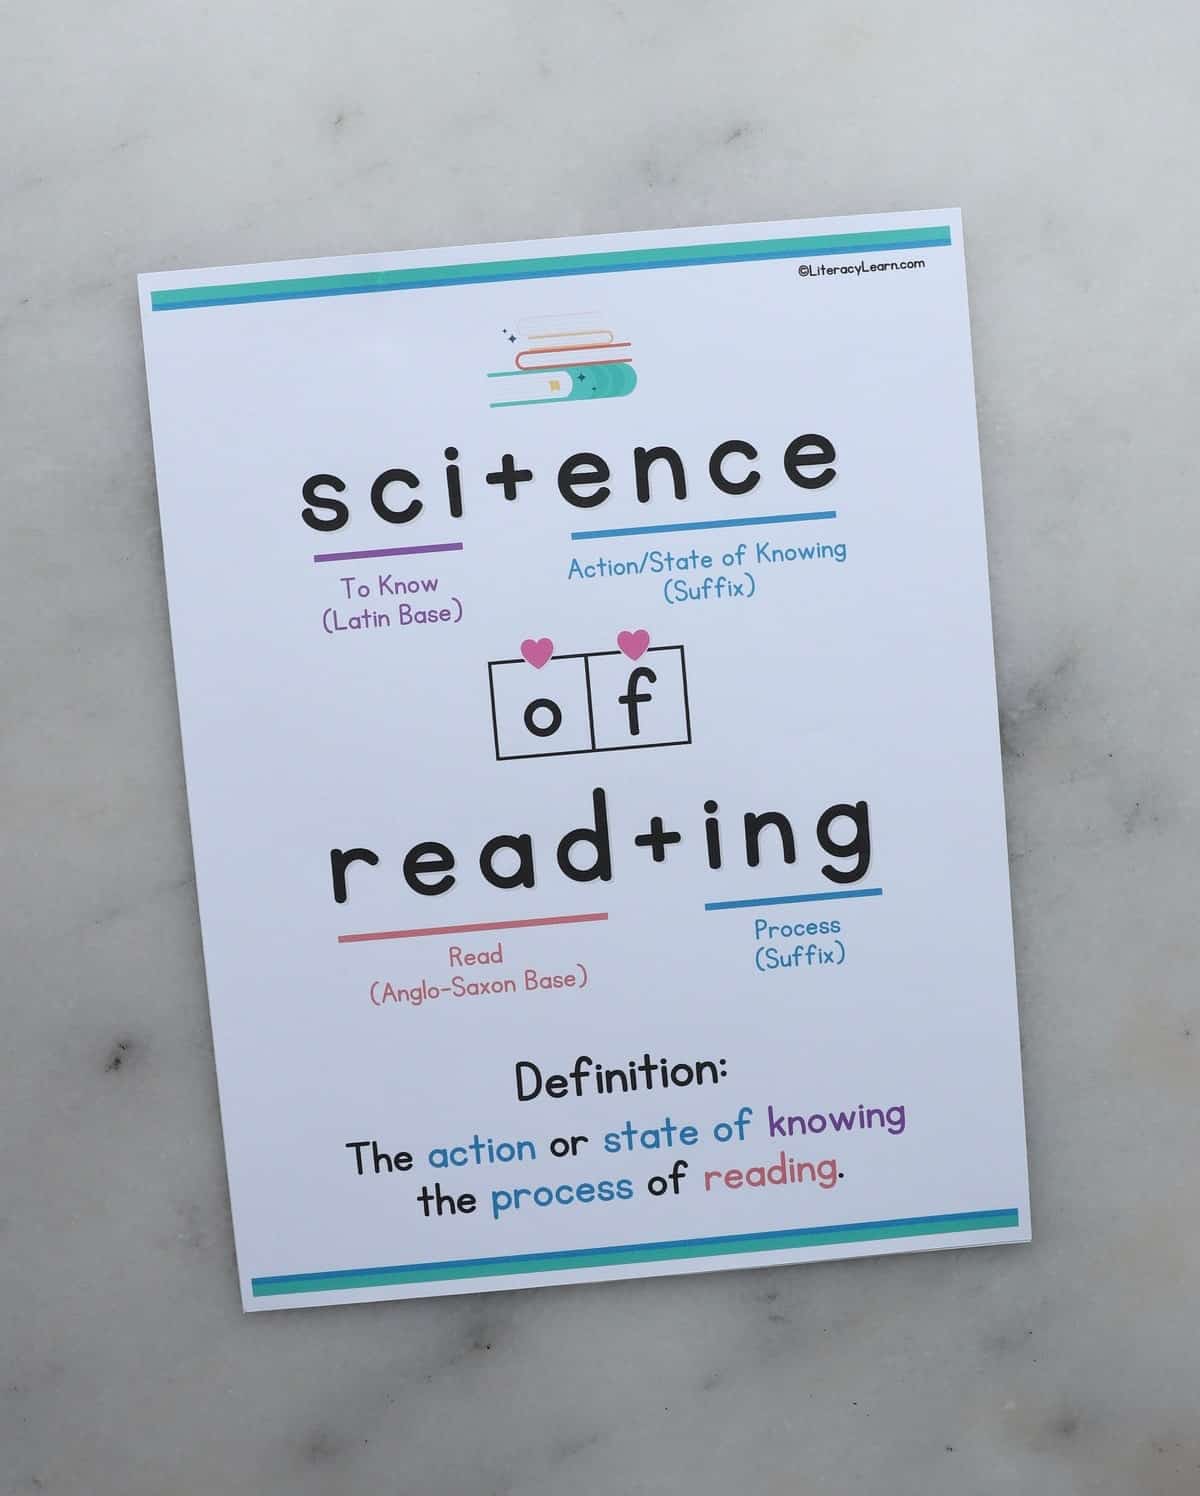 Photo of the printed version of the Science of Reading morphology poster.